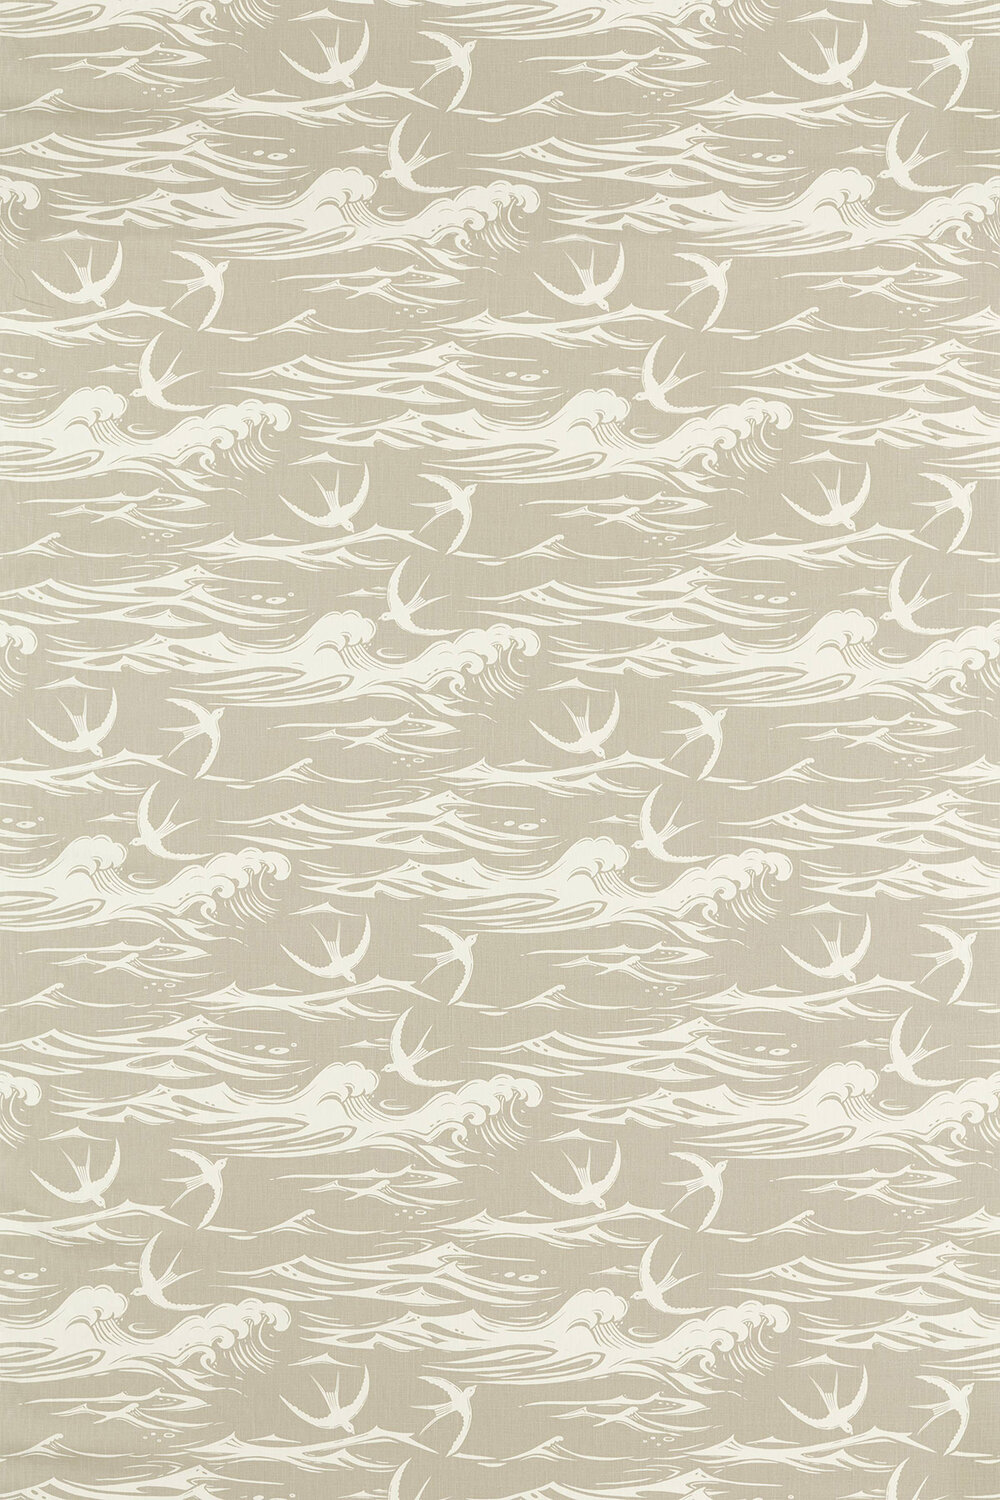 Swallows at Sea Fabric - Linen - by Sanderson